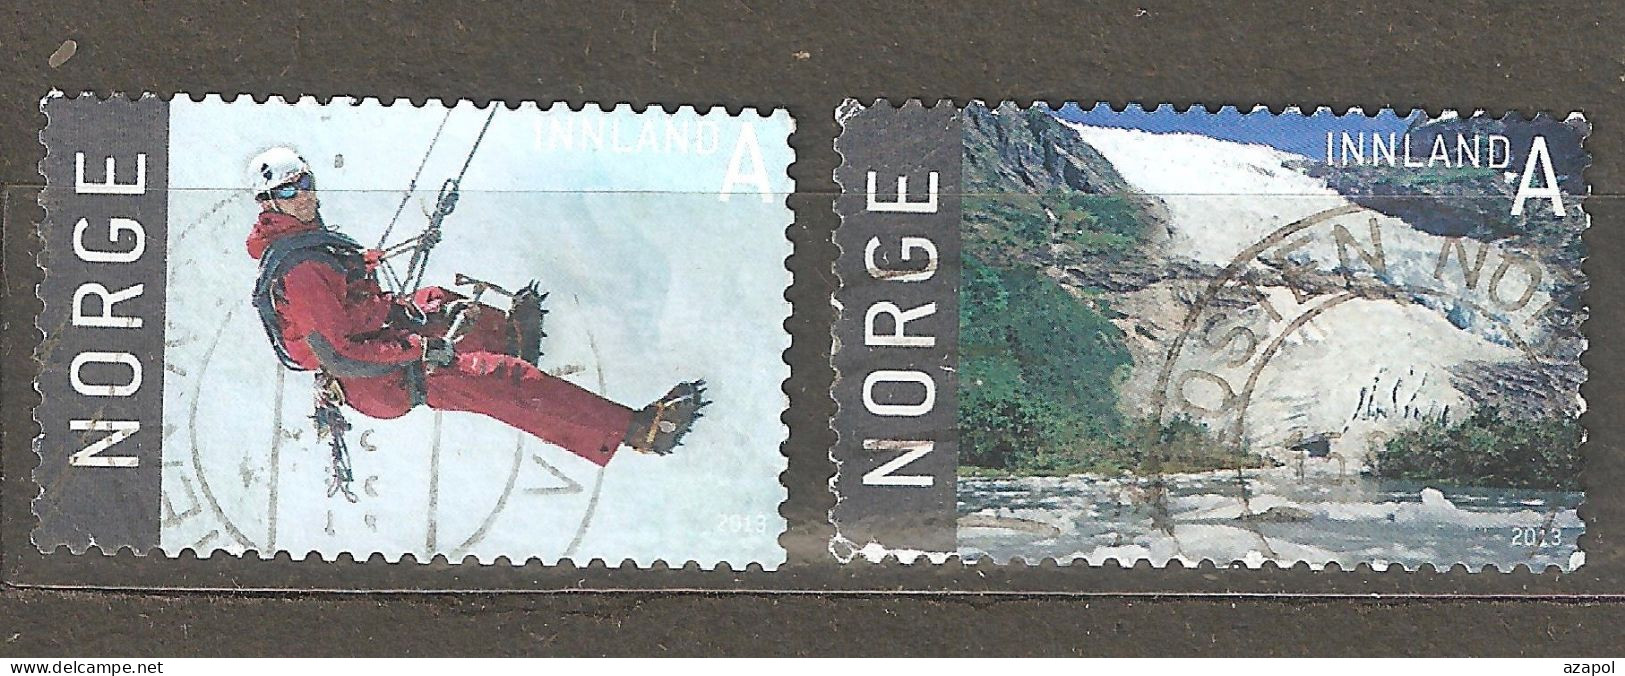 Norway: 2 Used Stamps From A Set, Tourism-a Climber On A Gletcher, Waterfall, 2013, Mi#1809-10 - Used Stamps